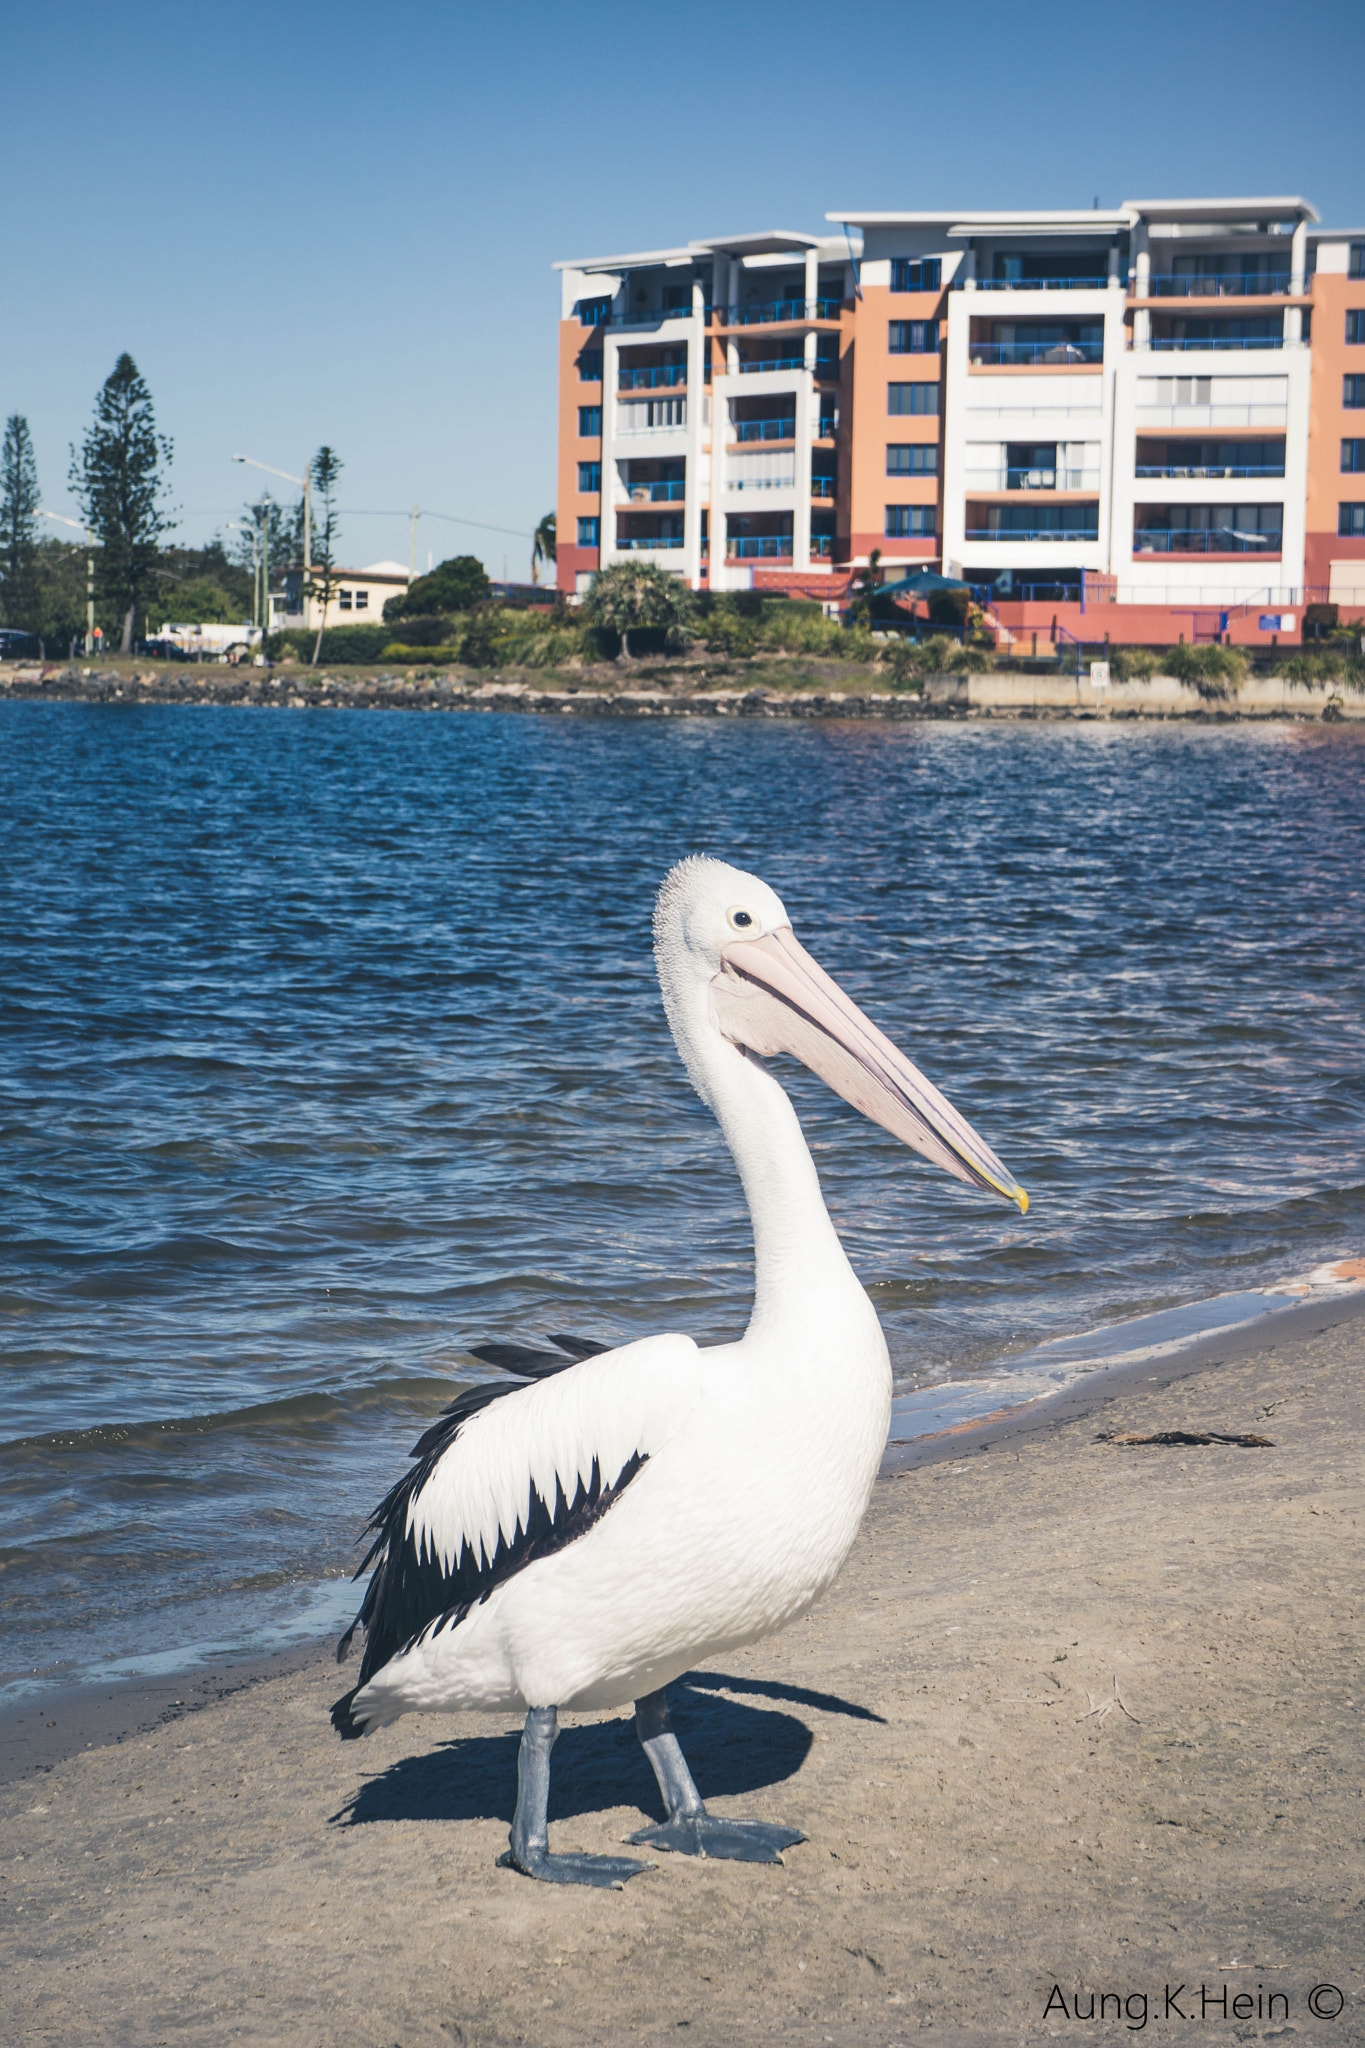 Hasselblad Lunar sample photo. Potrait of a pelican photography